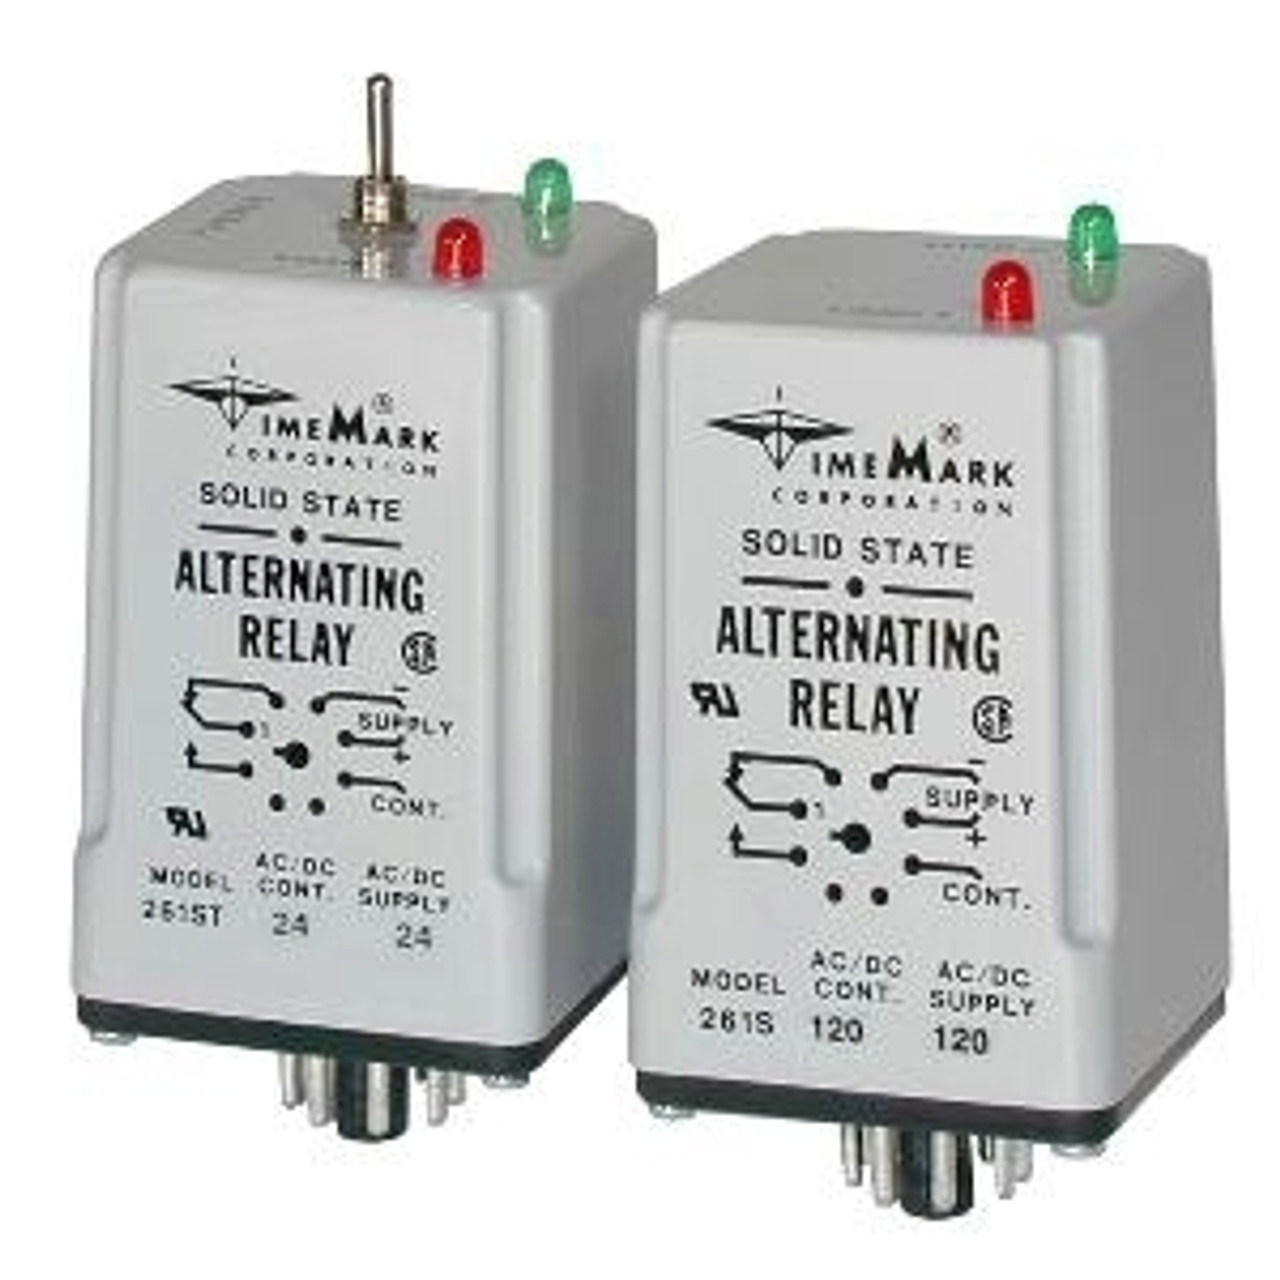 TimeMark 261-ST-120 Alternating Sequencing Relay